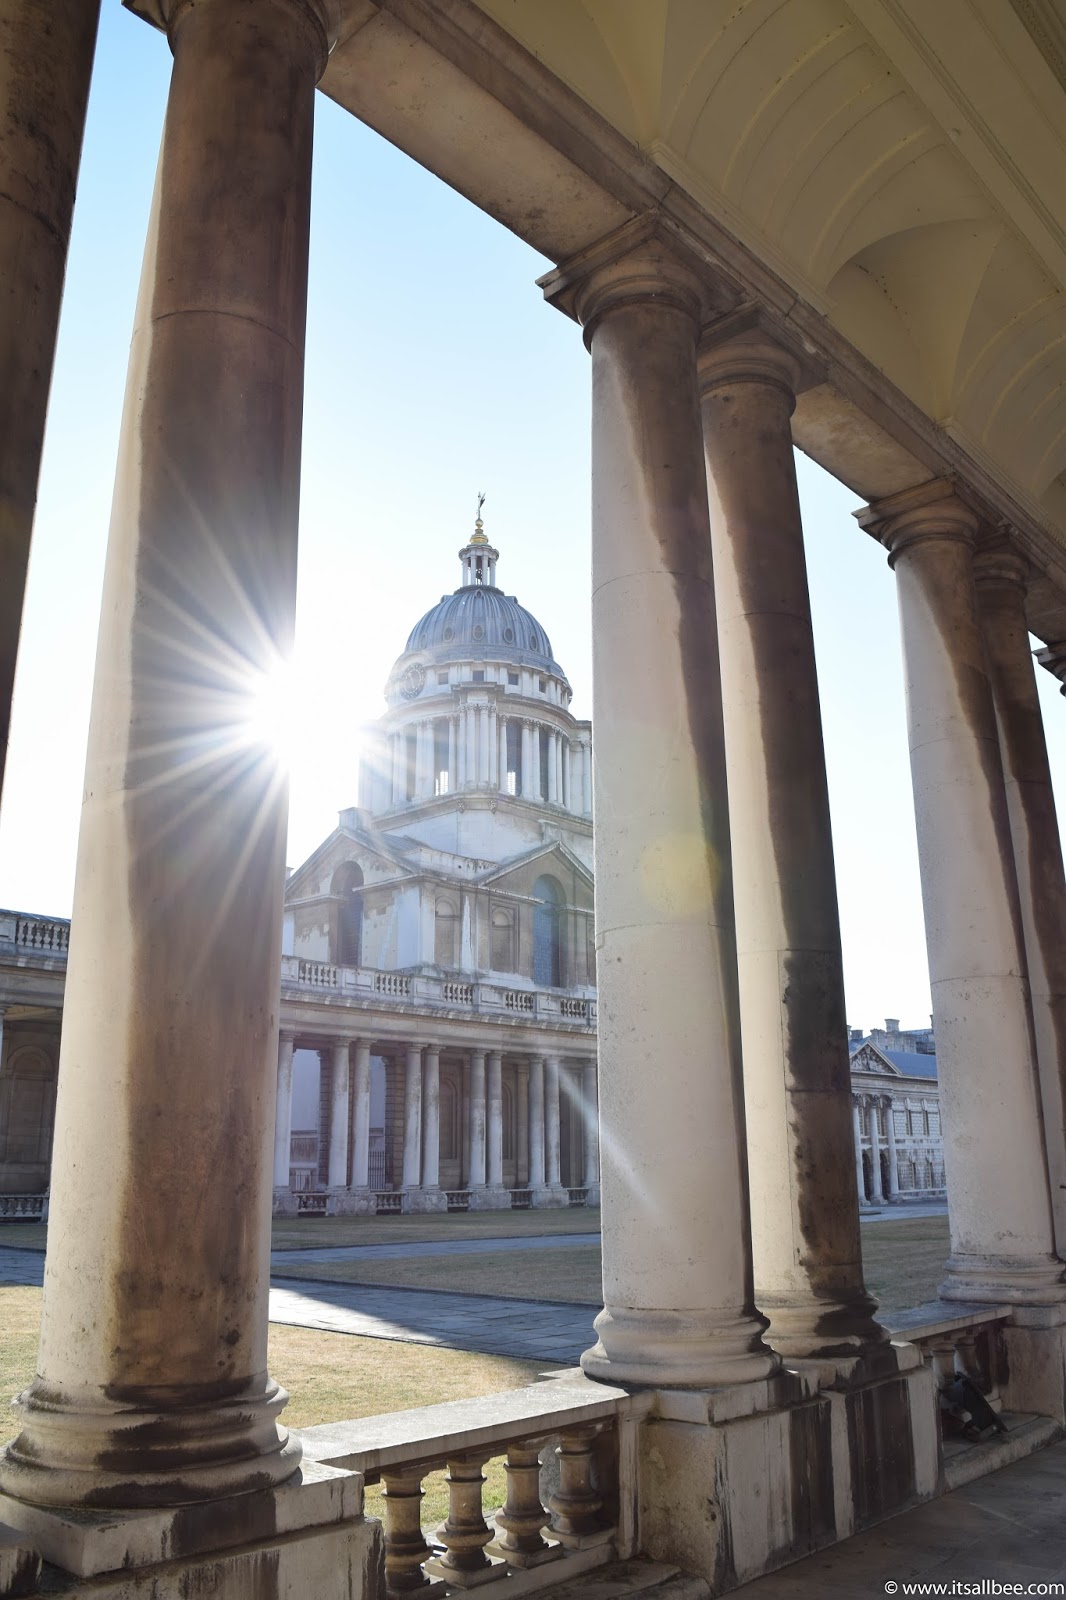 10 Things To Do In Greenwich London - ItsAllBee | Solo Travel